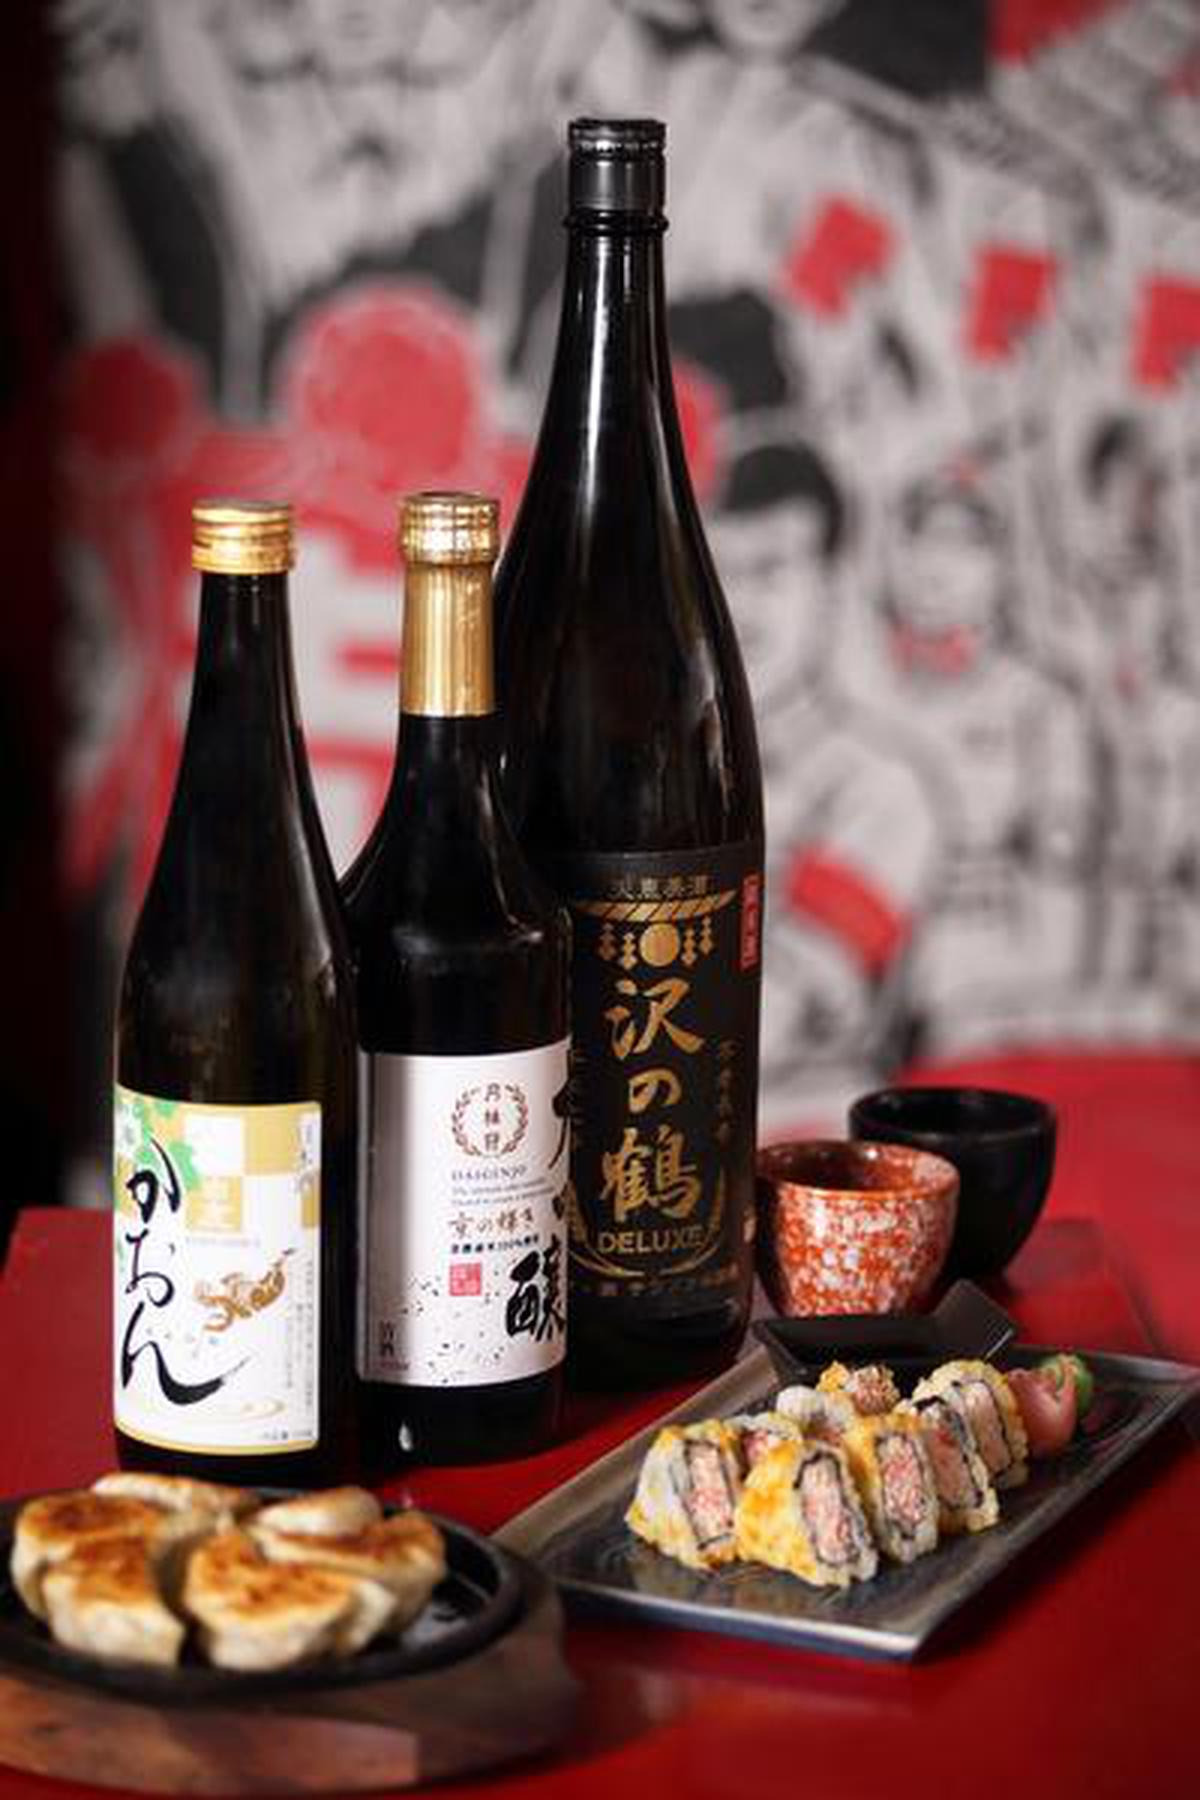 Has India caught up with the global sake trend? - The Hindu